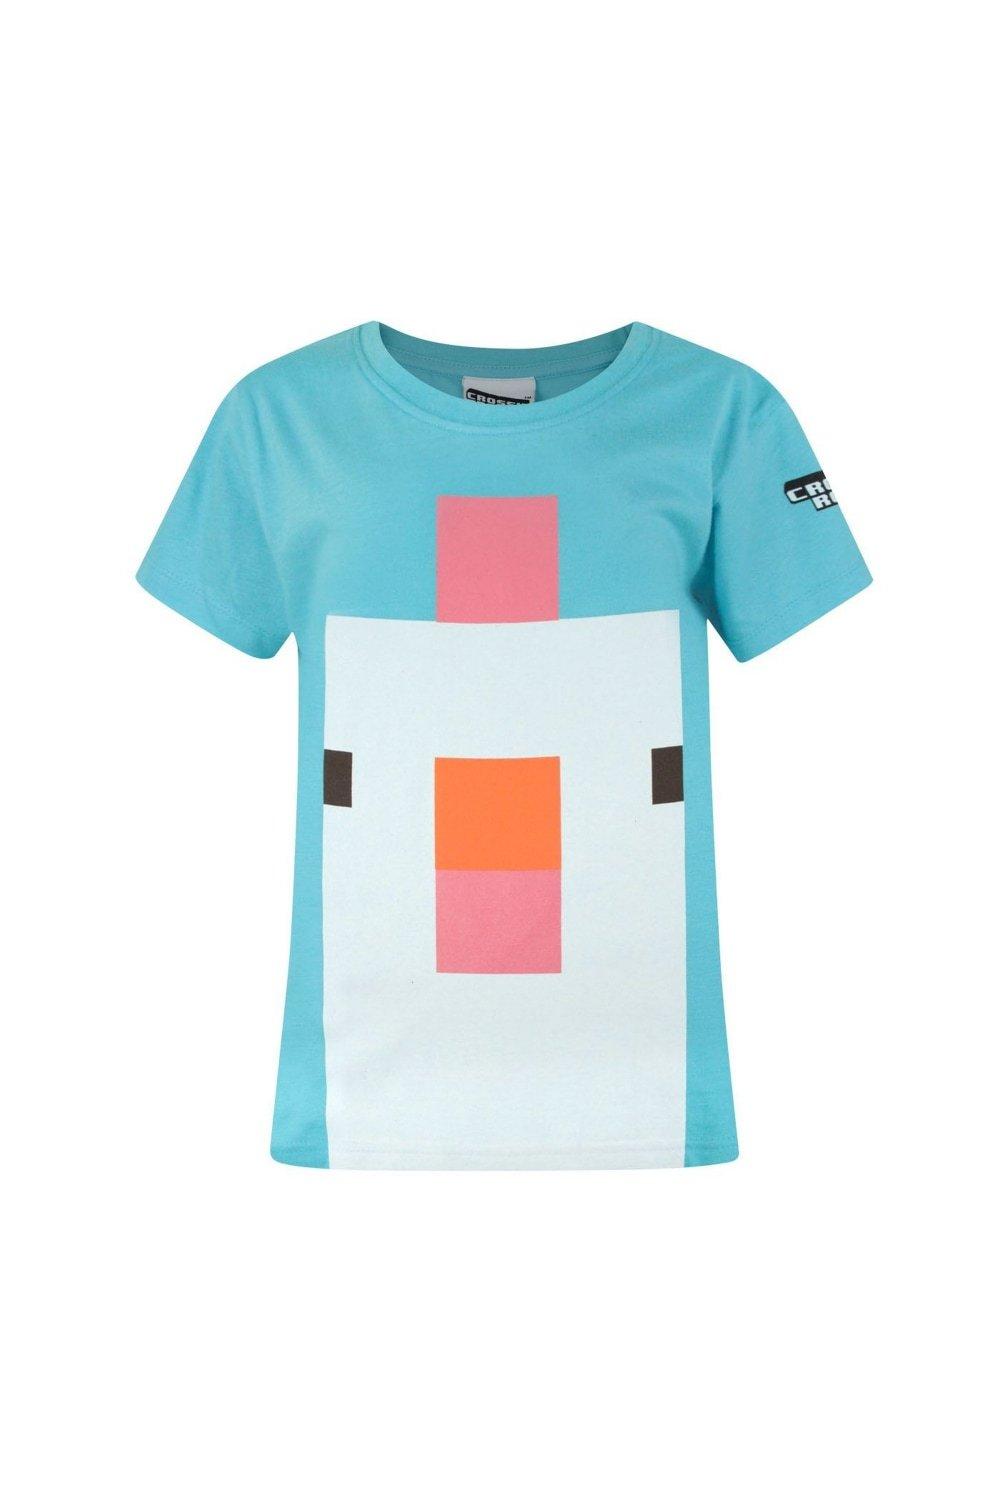 Crossy Road Official Chicken Face T-Shirt